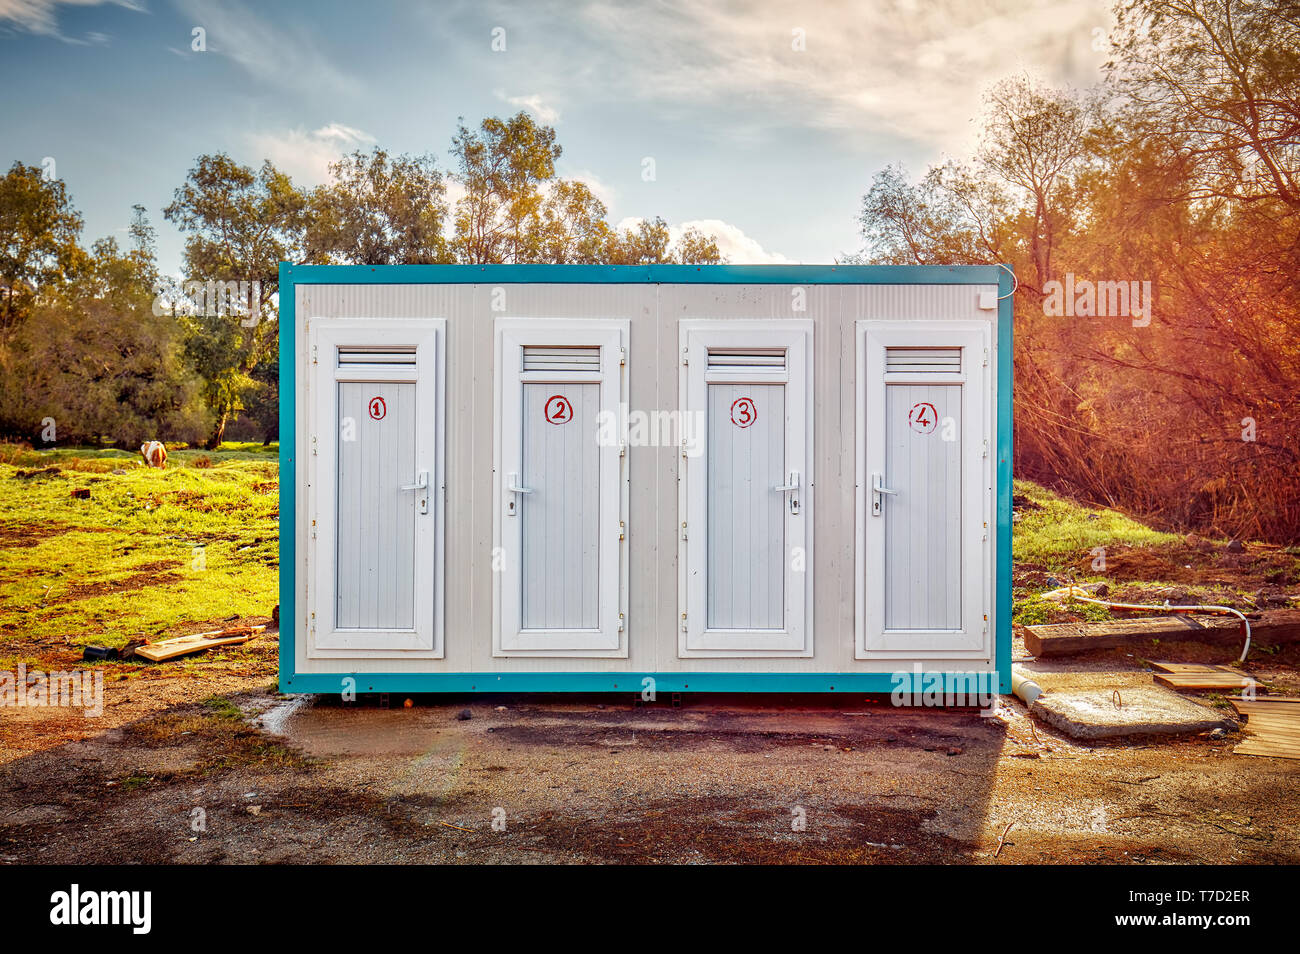 Prefabricated portable cabin with four numbered doors on a meadow field in the forest Stock Photo